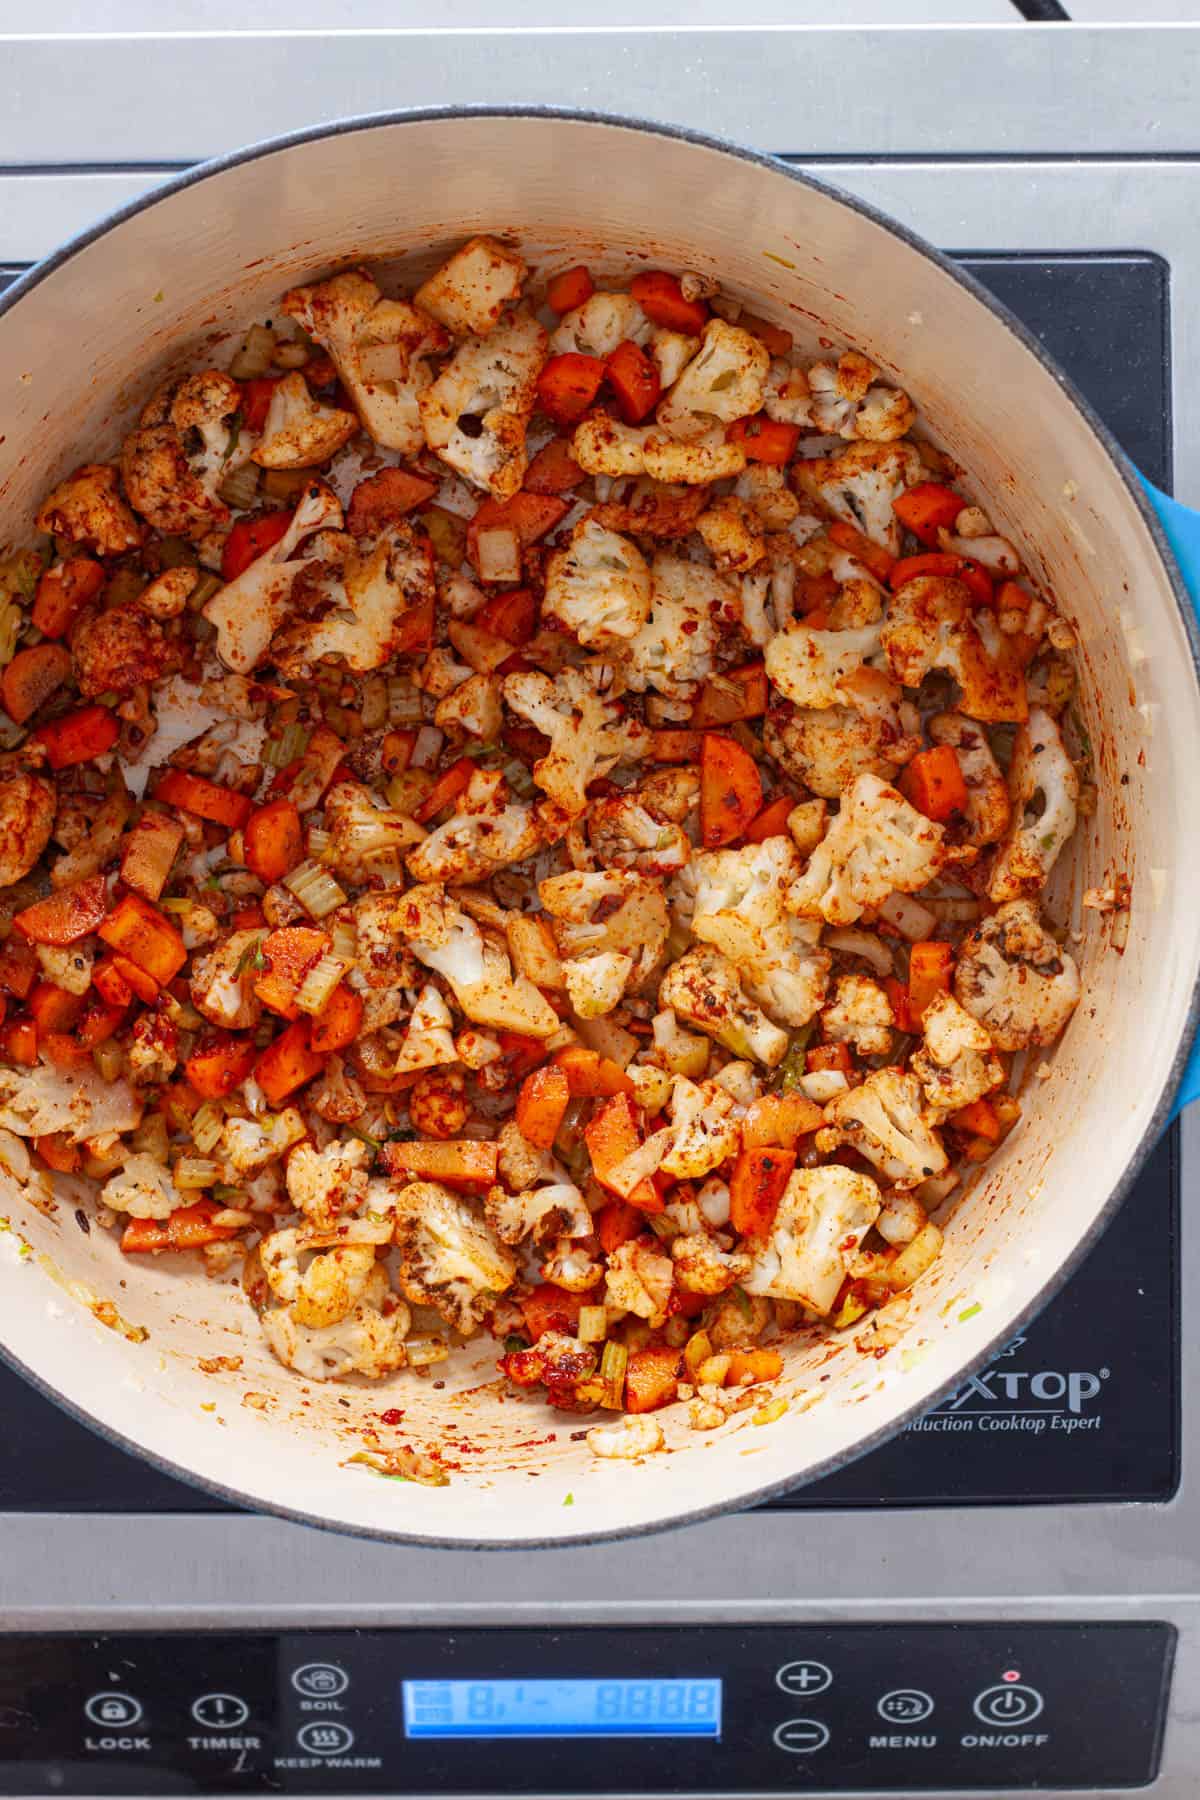 Cauliflower and other vegetables coated in spices and tomato paste cooking in a Dutch oven.